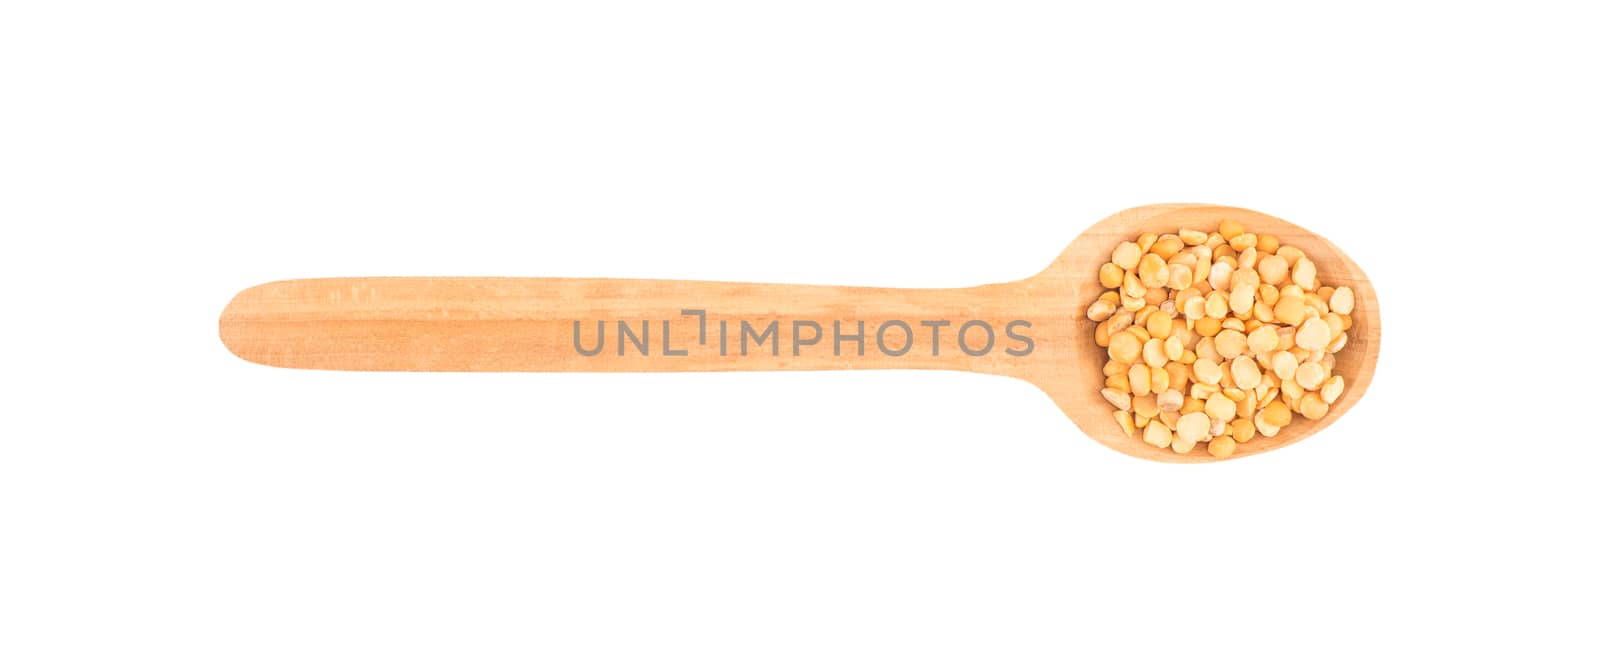 Dried peas in a wooden spoon on a white background